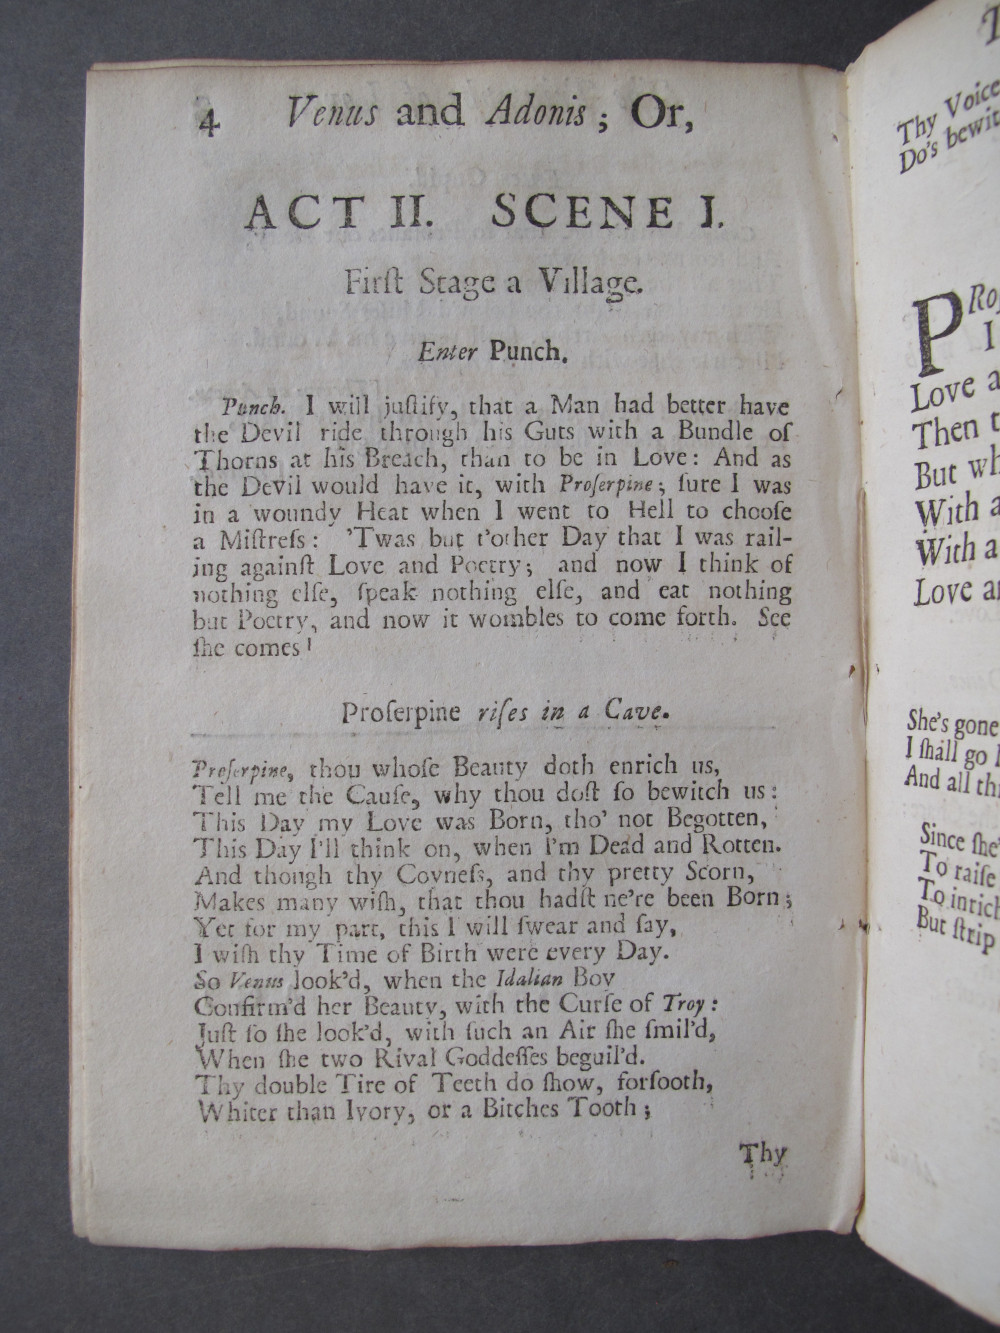 Page 4, text: 
4 Venus and Adonis; Or,

ACT II. SCENE I.
First Stage a Village.

Enter Punch.

Punch. I will justify, that a Man had better have
the Devil ride through his Guts with a Bundle of
Thorns at his Breach, than to be in Love: And as
the Devil would have it, with Proserpine, sure I was
in a woundy Heat when I went to Hell to choose
a Mistress: 'Twas but t'other Day that I was rail-
ing against Love and Poetry; and now I think of
nothing else, speak nothing else, and eat nothing
but Poetry, and now it wombles to come forth. See
she comes!

Proserpine rises in a Cave.

Proserpine, thou whose Beauty doth enrich us,
Tell me the Cause why thou dost so bewitch us:
This Day my Love was Born, tho' not Begotten,
This Day I'll think on, when I'm Dead and Rotten.
And though thy Coyness, and thy pretty Scorn,
Makes many wish, that thou hadst ne're been Born;
Yet for my part, this I will swear and say,
I wish thy Time of Birth were every Day.
So Venus look'd, when the Idalian Boy
Confirmed her Beauty, with the Curse of Troy:
Just so she look'd, with such an Air she smil'd,
When she two Rival Goddesses beguil'd.
Thy double Tire of Teeth do show, forsooth,
Whiter than Ivory, or a Bitches Tooth;

Thy

